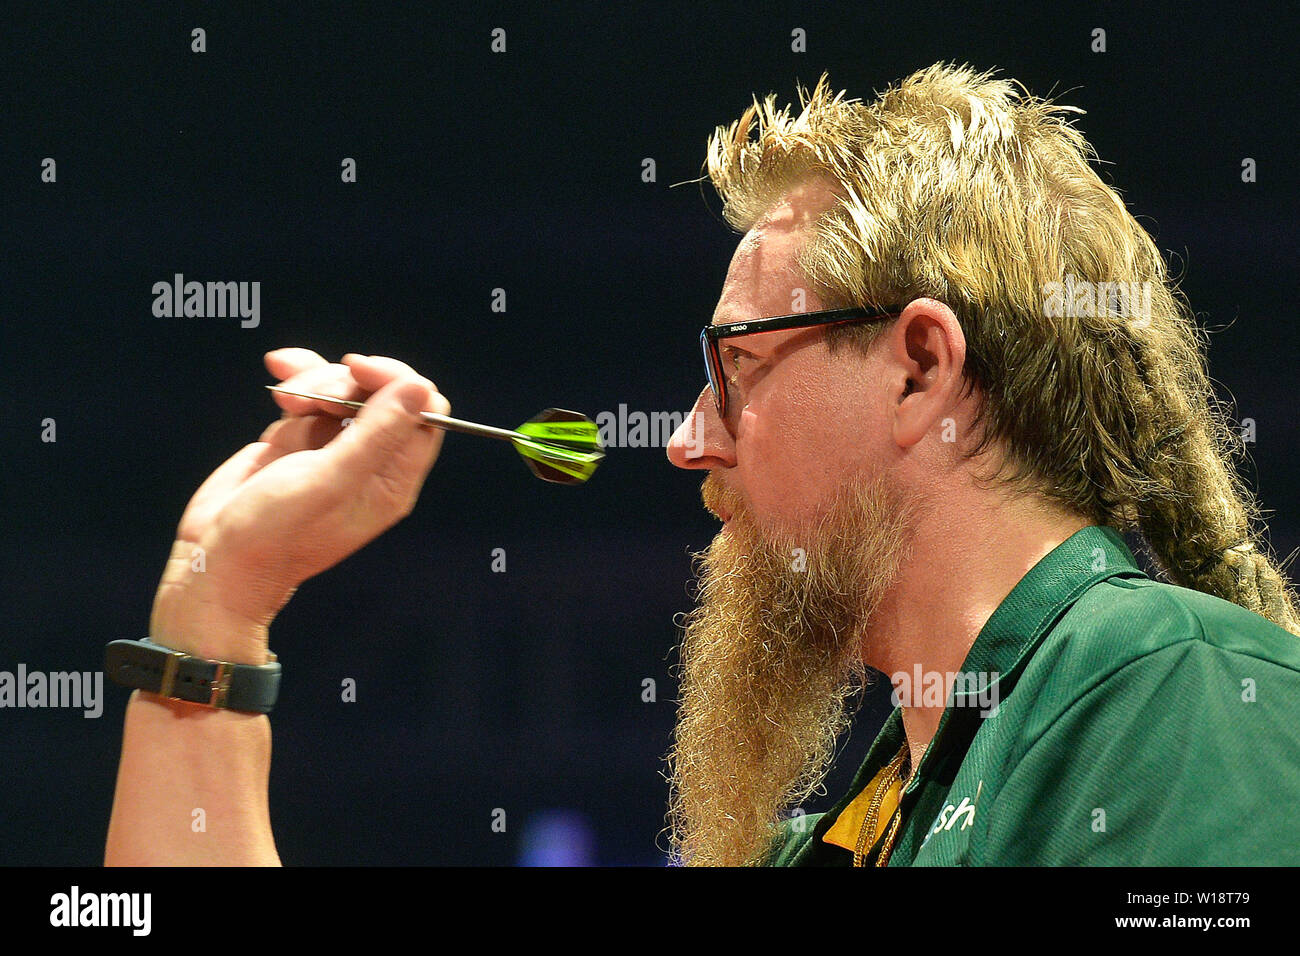 Prague, Czech Republic. 30th June, 2019. Simon Whitlock competes in the PDC Czech  Darts Open in